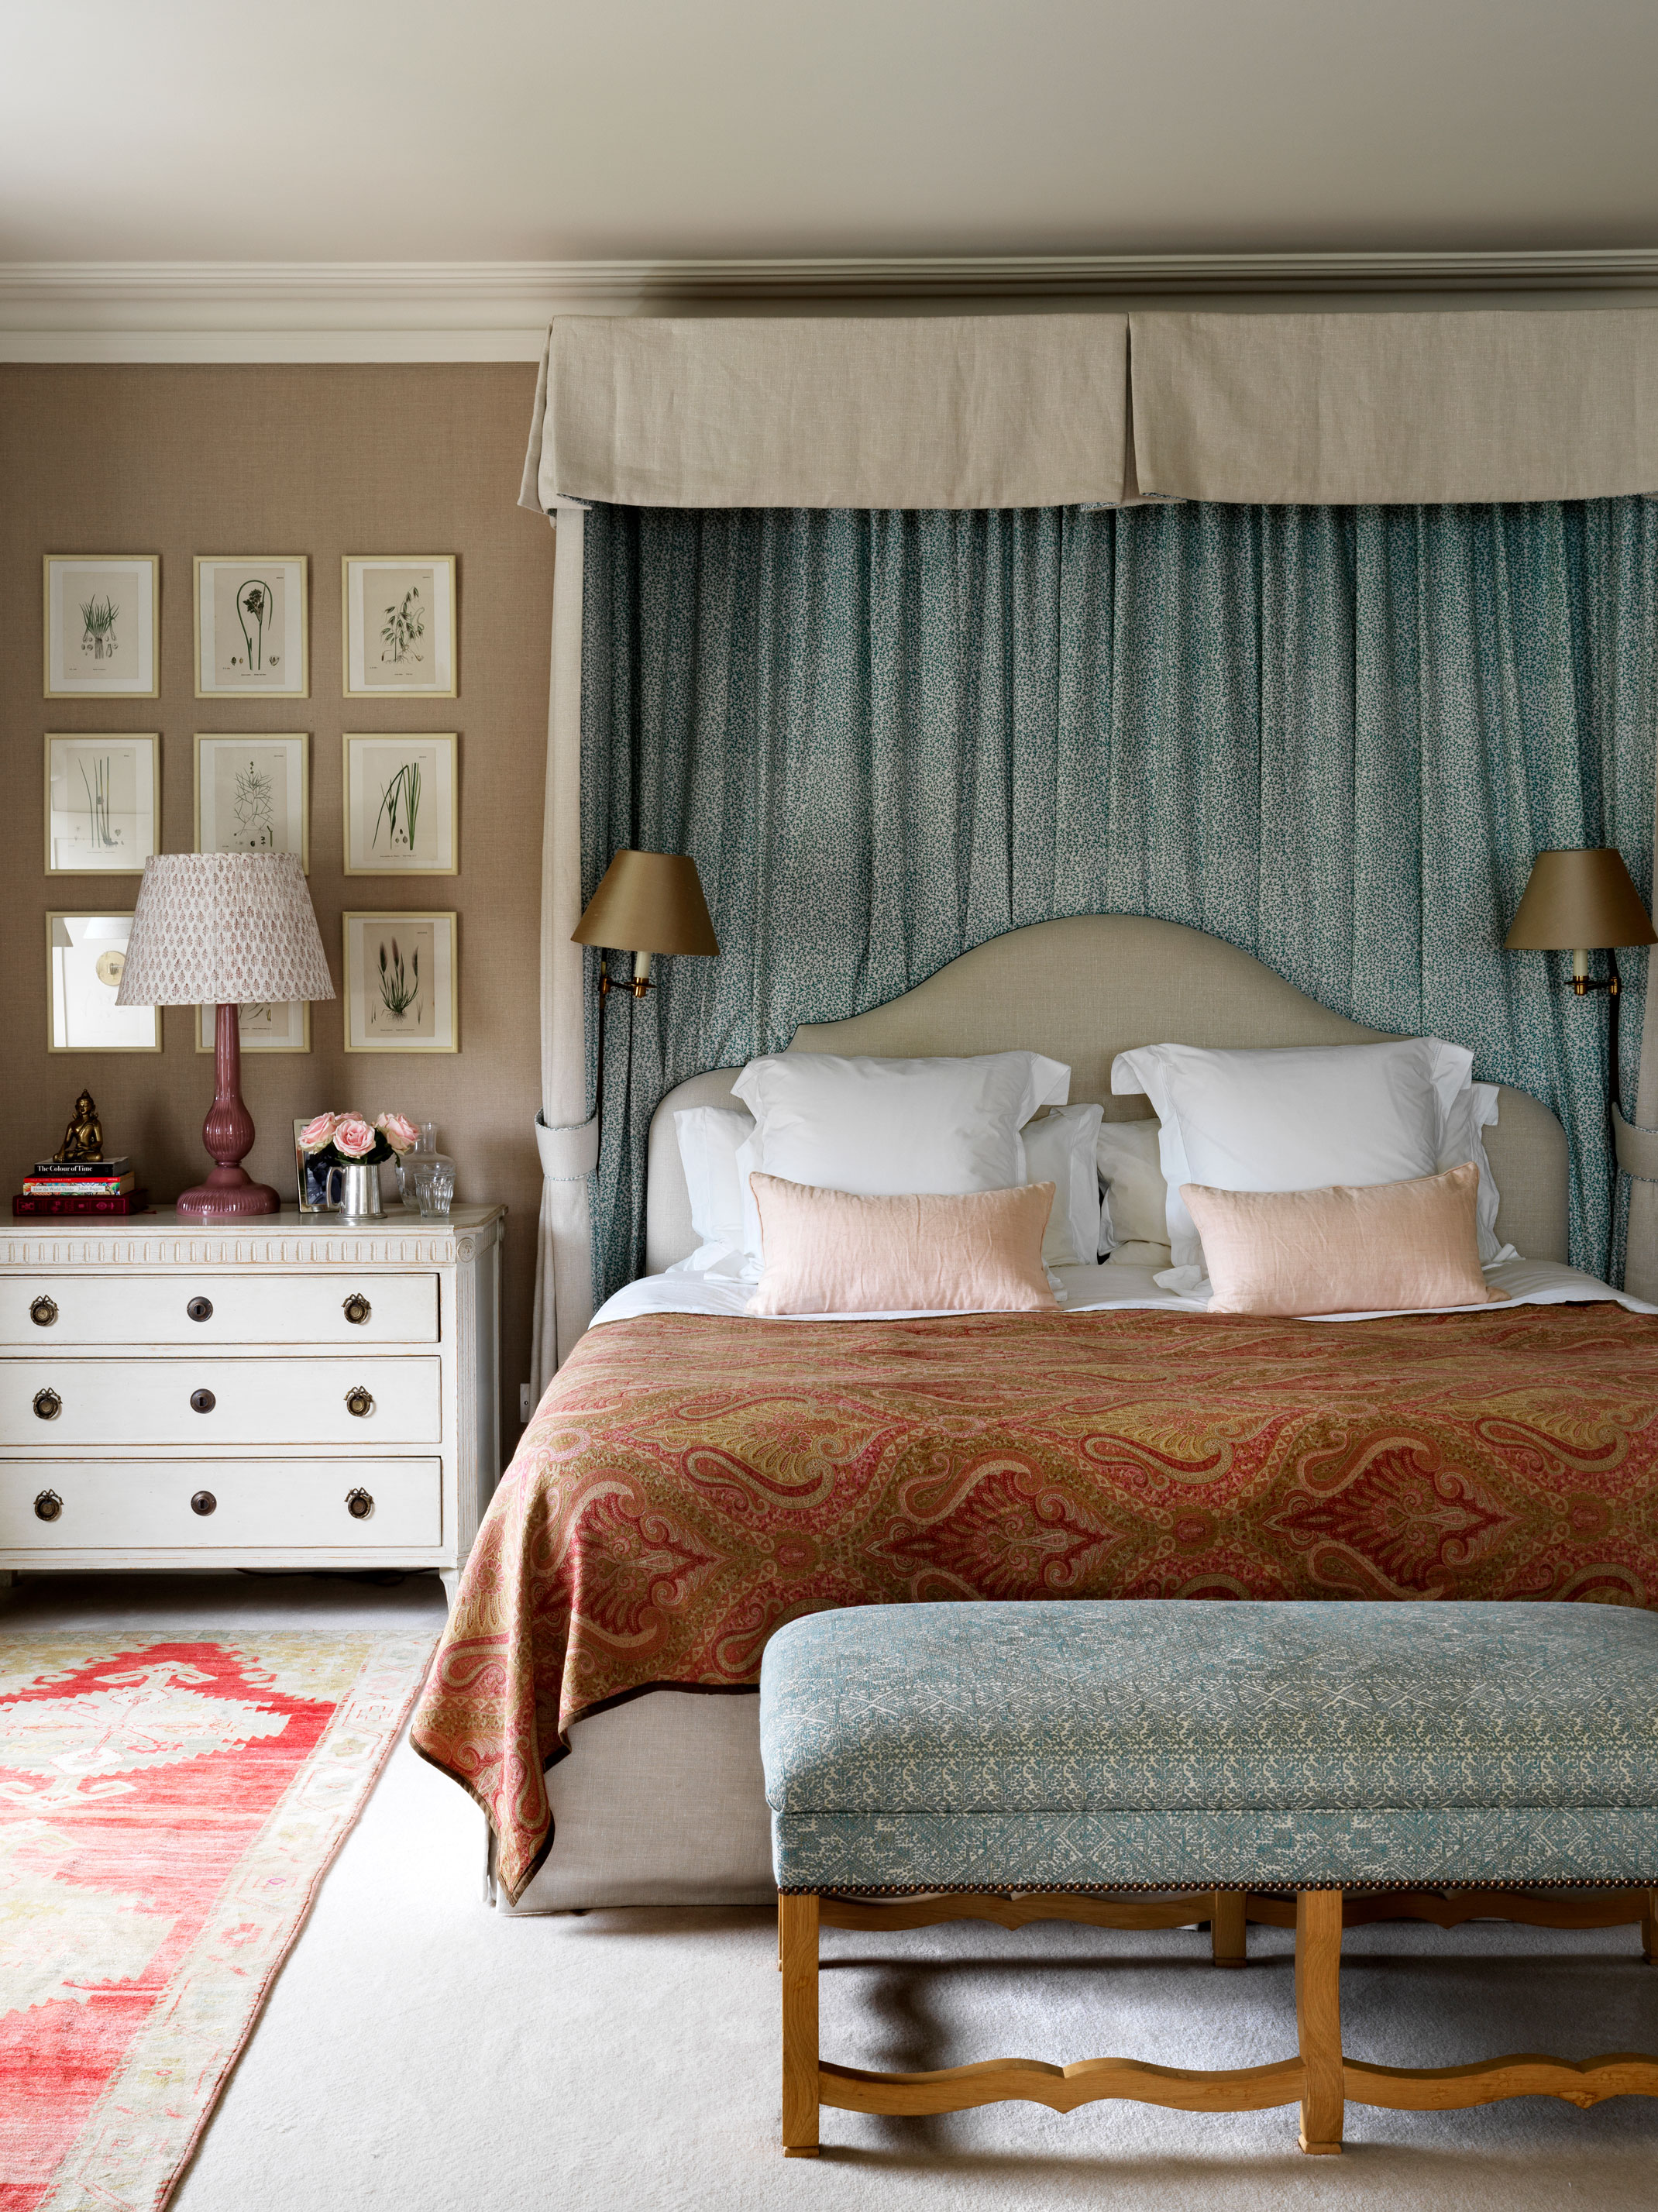 Best bedroom colors in a calming schceme, with duck egg blue bed canopy and bench seat, coffee-colored walls and burnt orange paisley print throw.